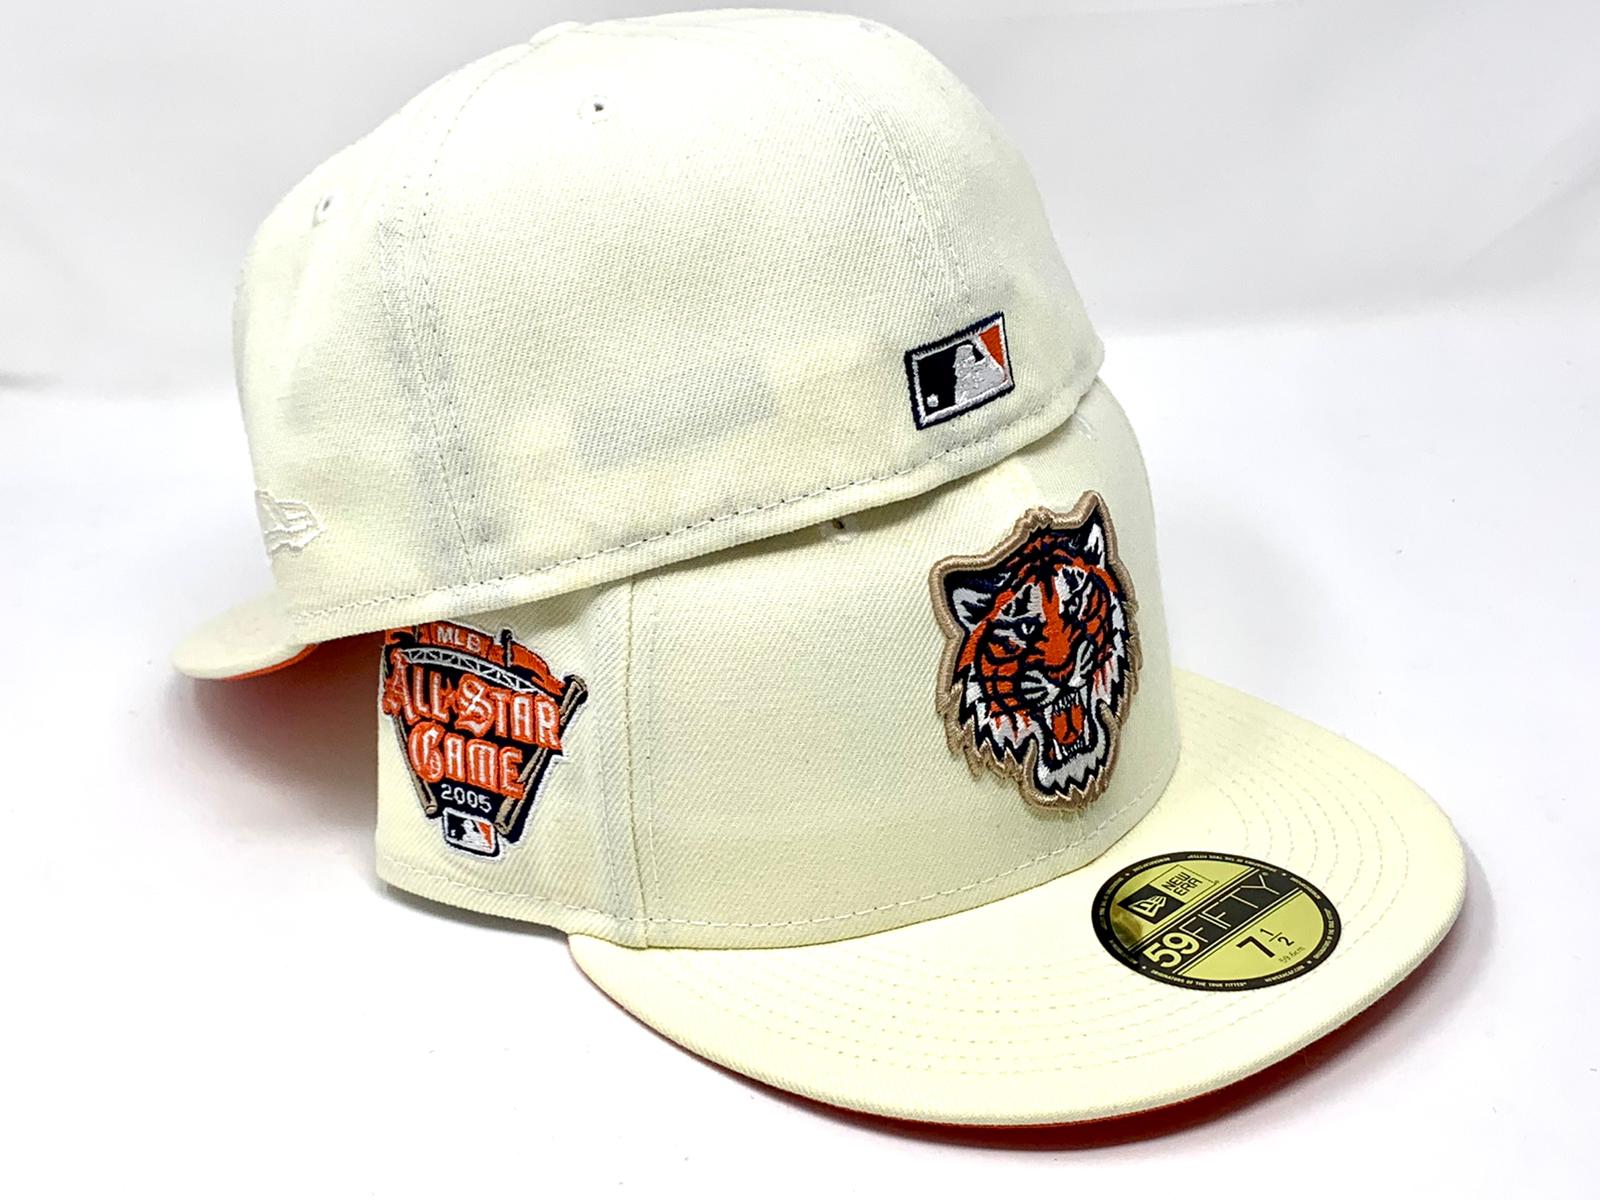 Men's New Era White/Orange Detroit Tigers Cooperstown Collection 2005 MLB All-Star Game Chrome 59FIFTY Fitted Hat